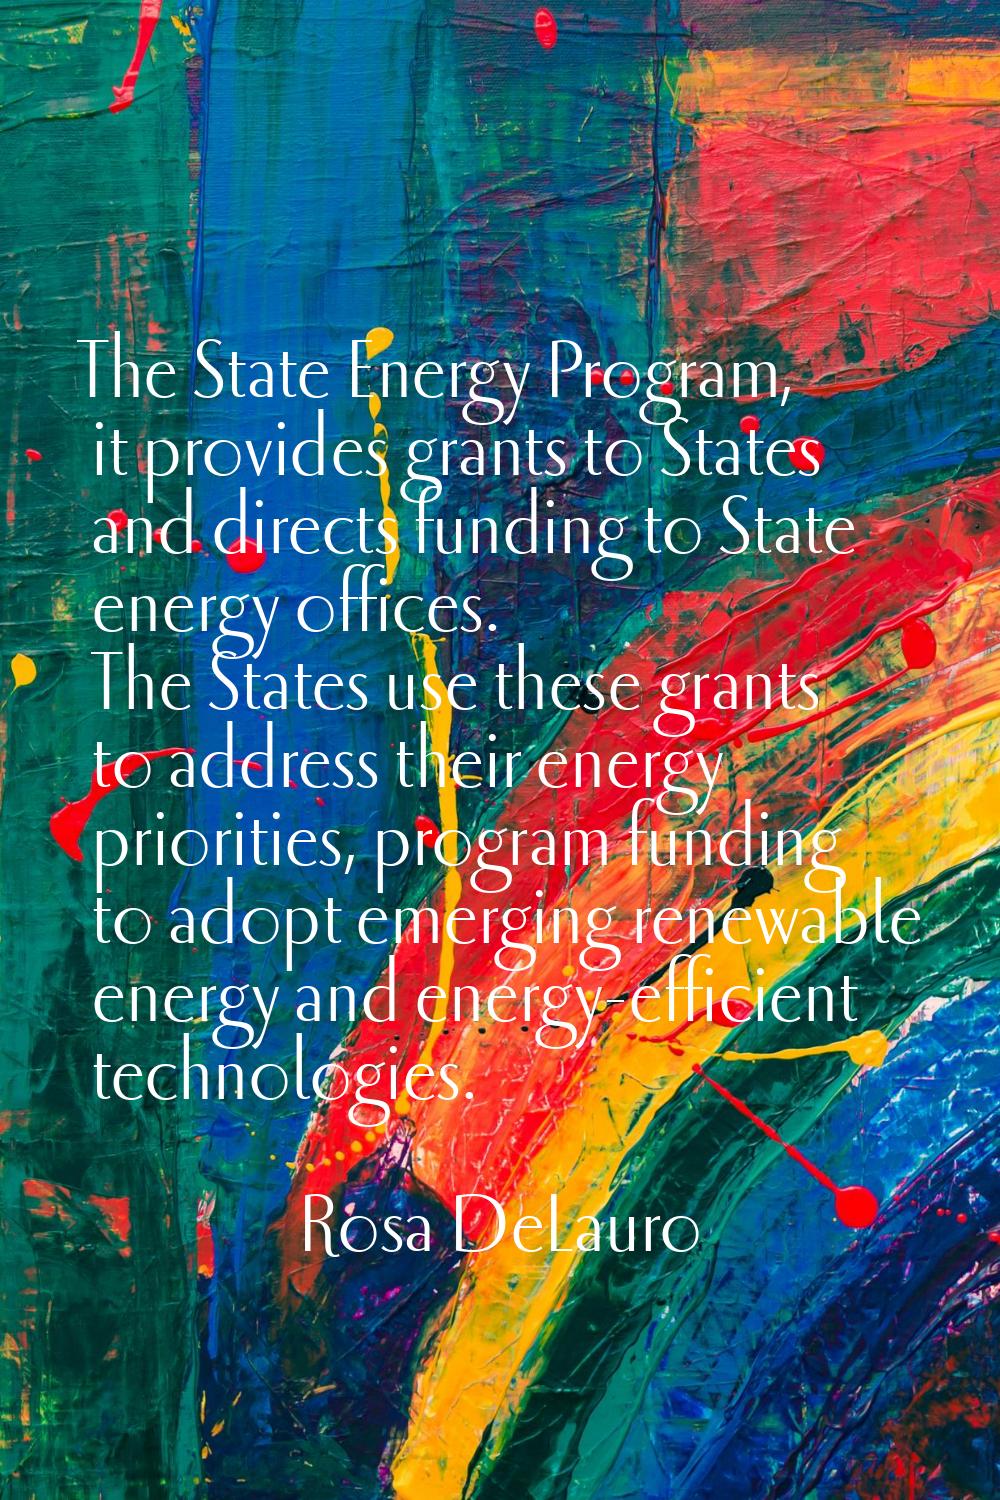 The State Energy Program, it provides grants to States and directs funding to State energy offices.